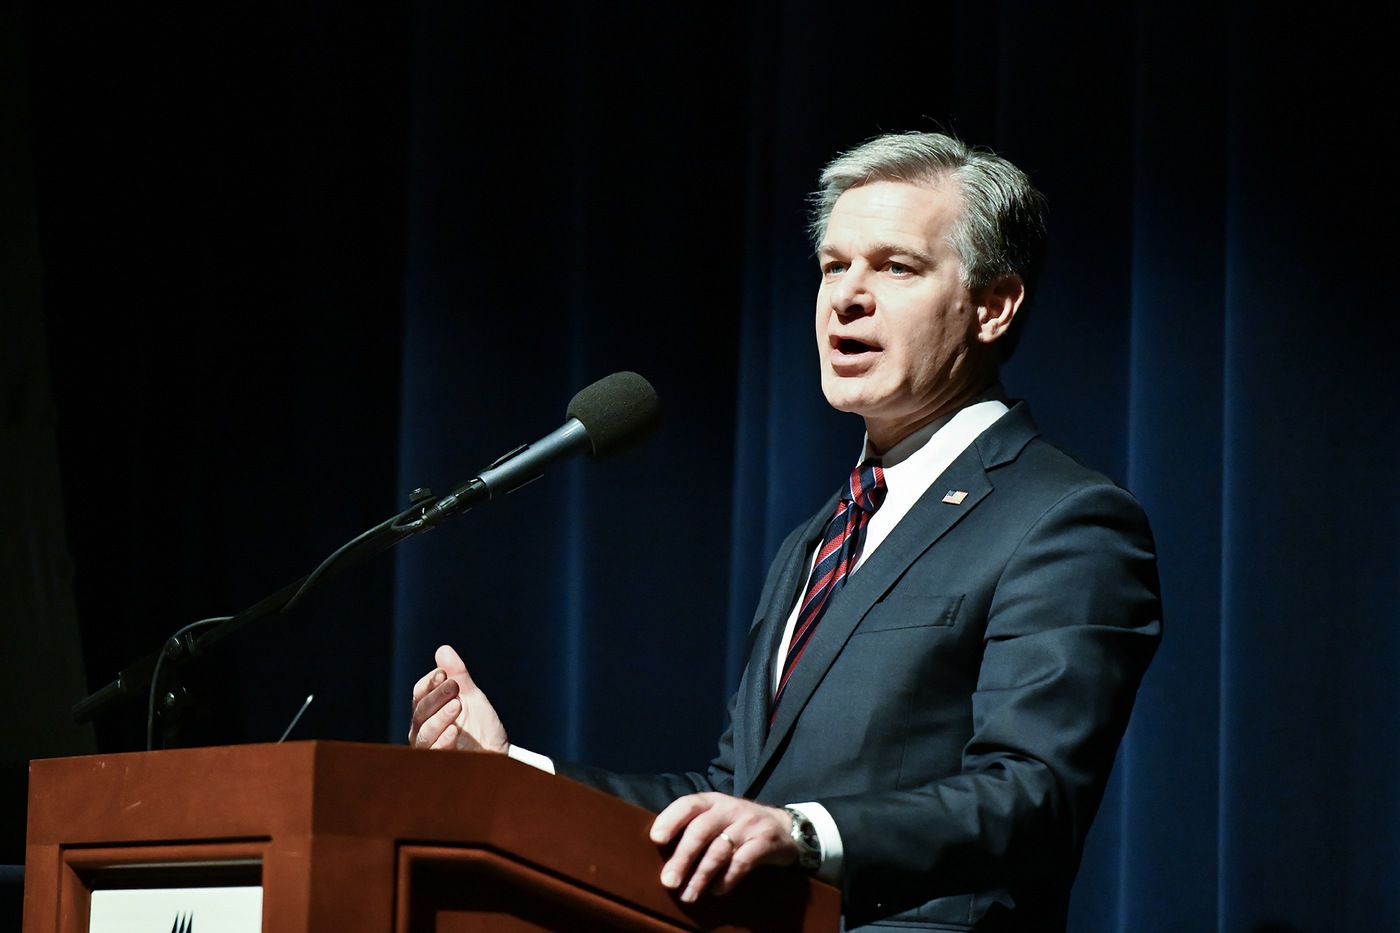 FBI Director Christopher Wray addresses the 2023 Homeland Security Symposium and Expo at Christopher Newport University in Newport News, Virginia, on February 16, 2023.